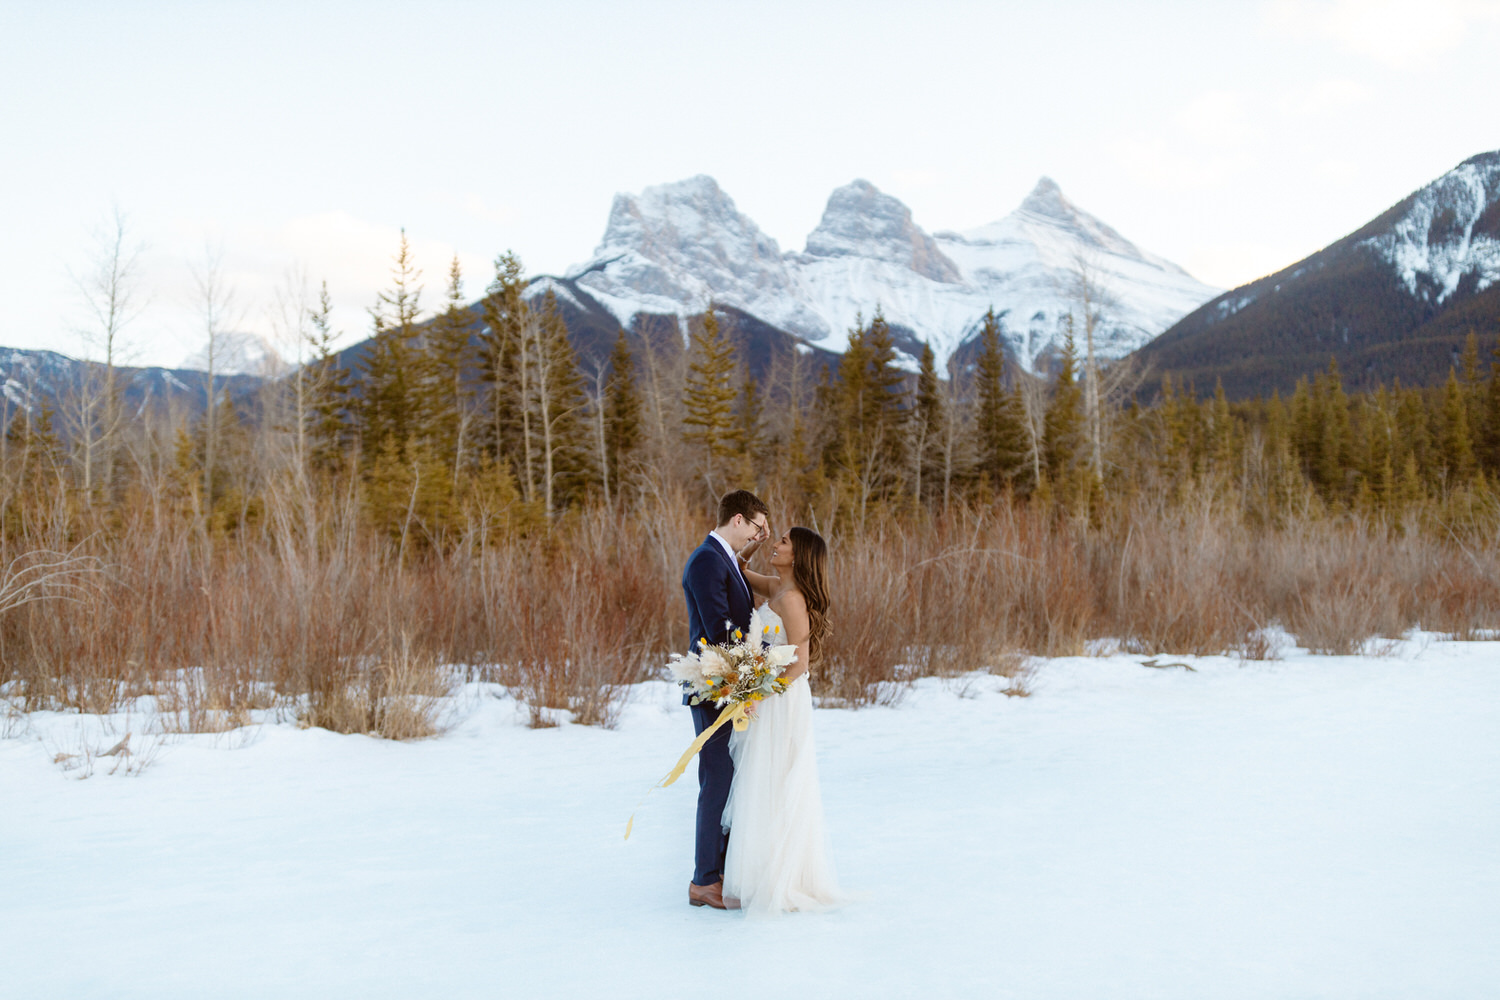 Canmore wedding videographer - Image 25